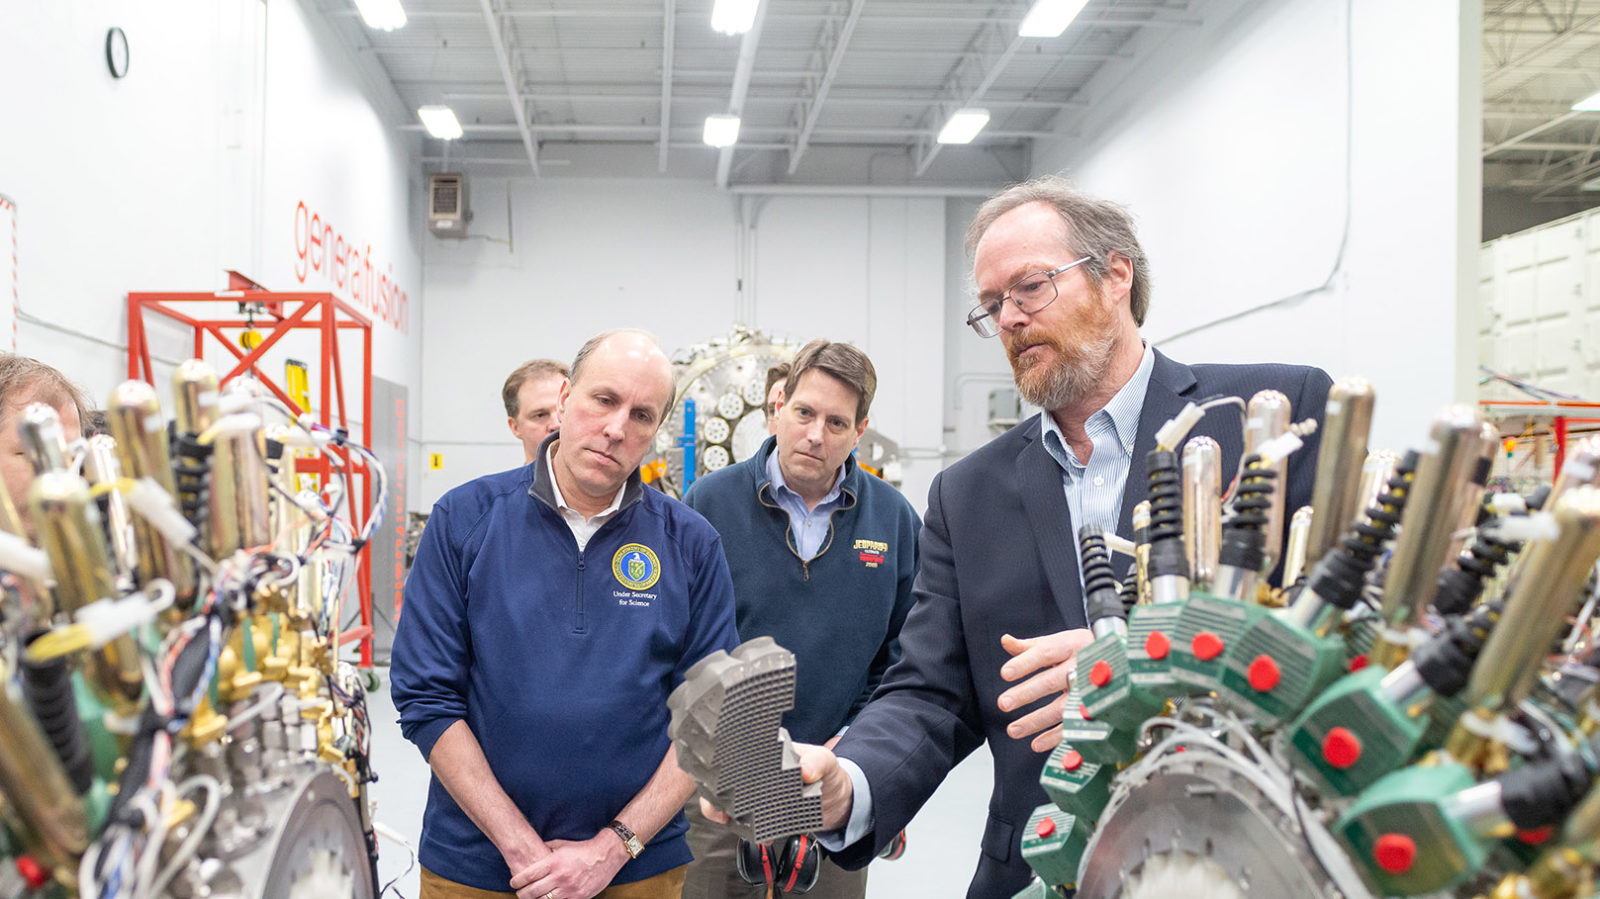 US Department of Energy Under Secretary for Science visits General Fusion